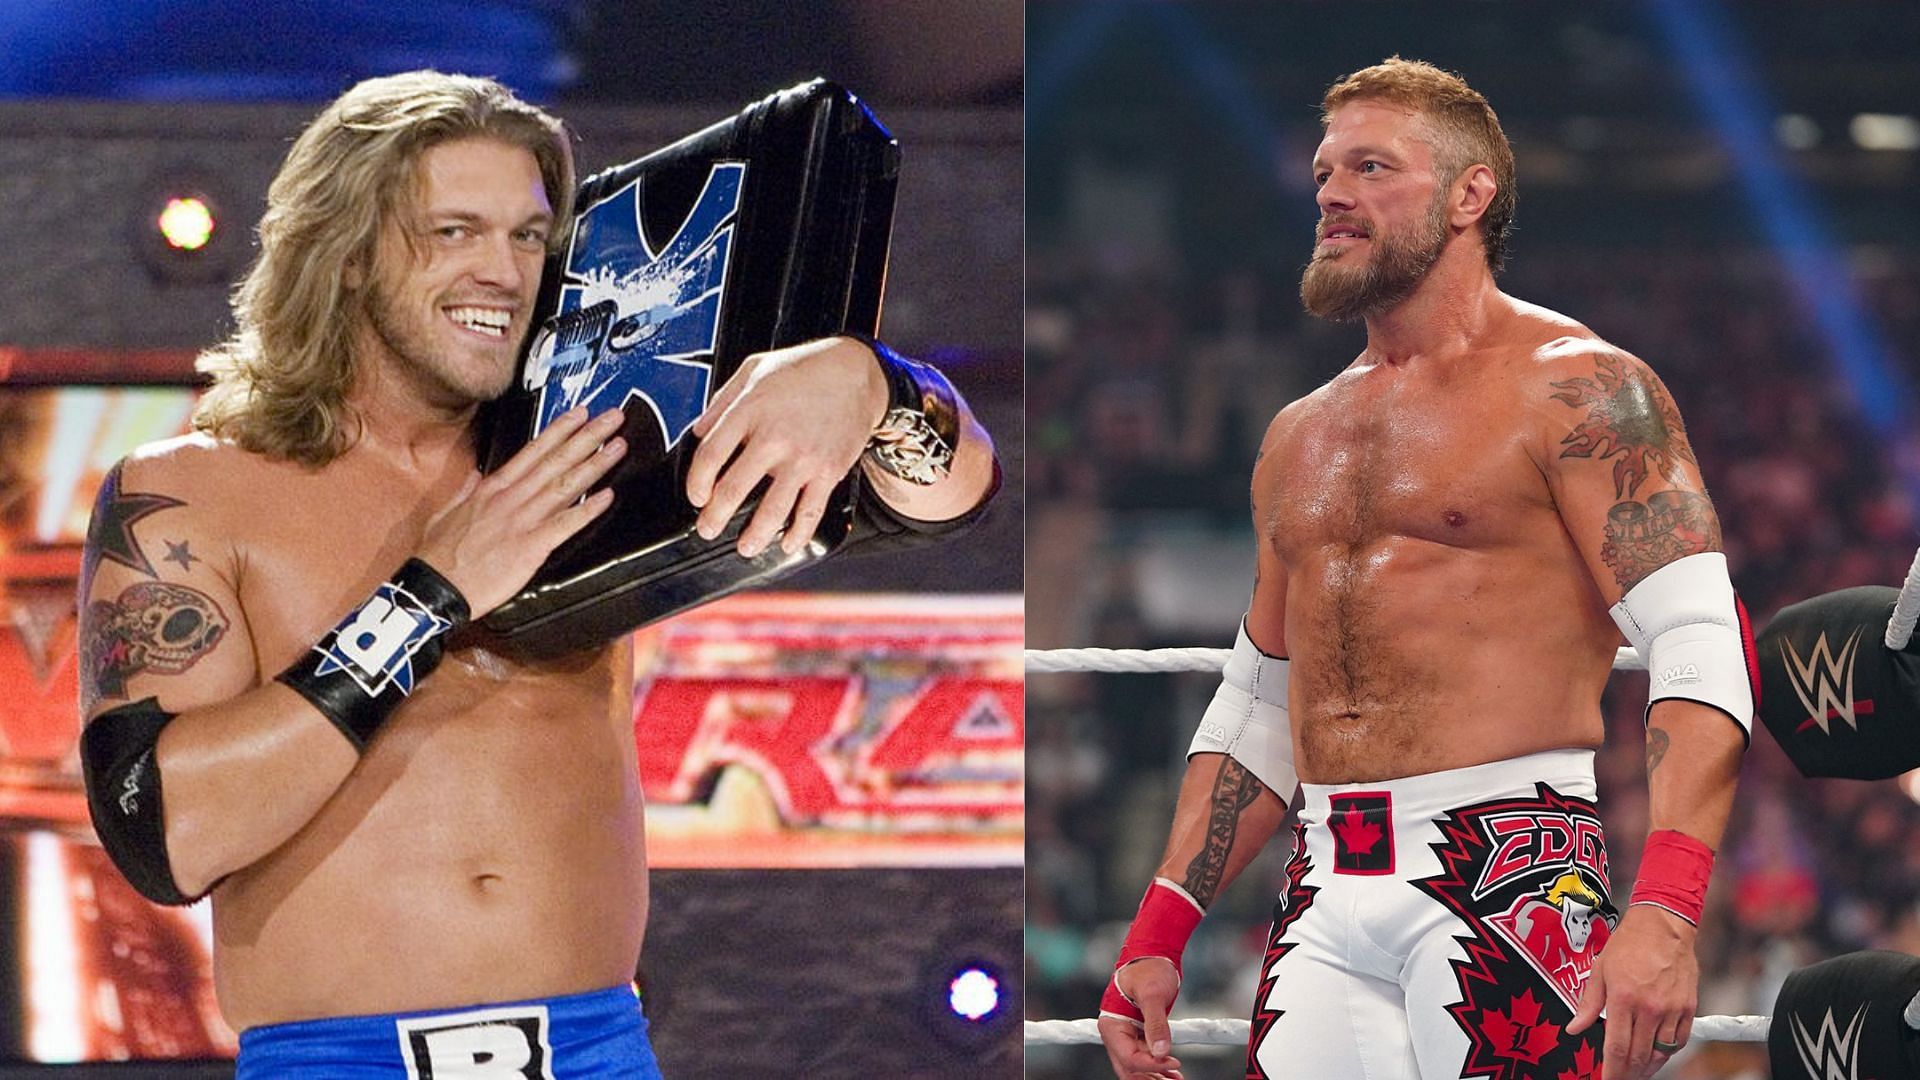 Edge is one of the best wrestlers in WWE history